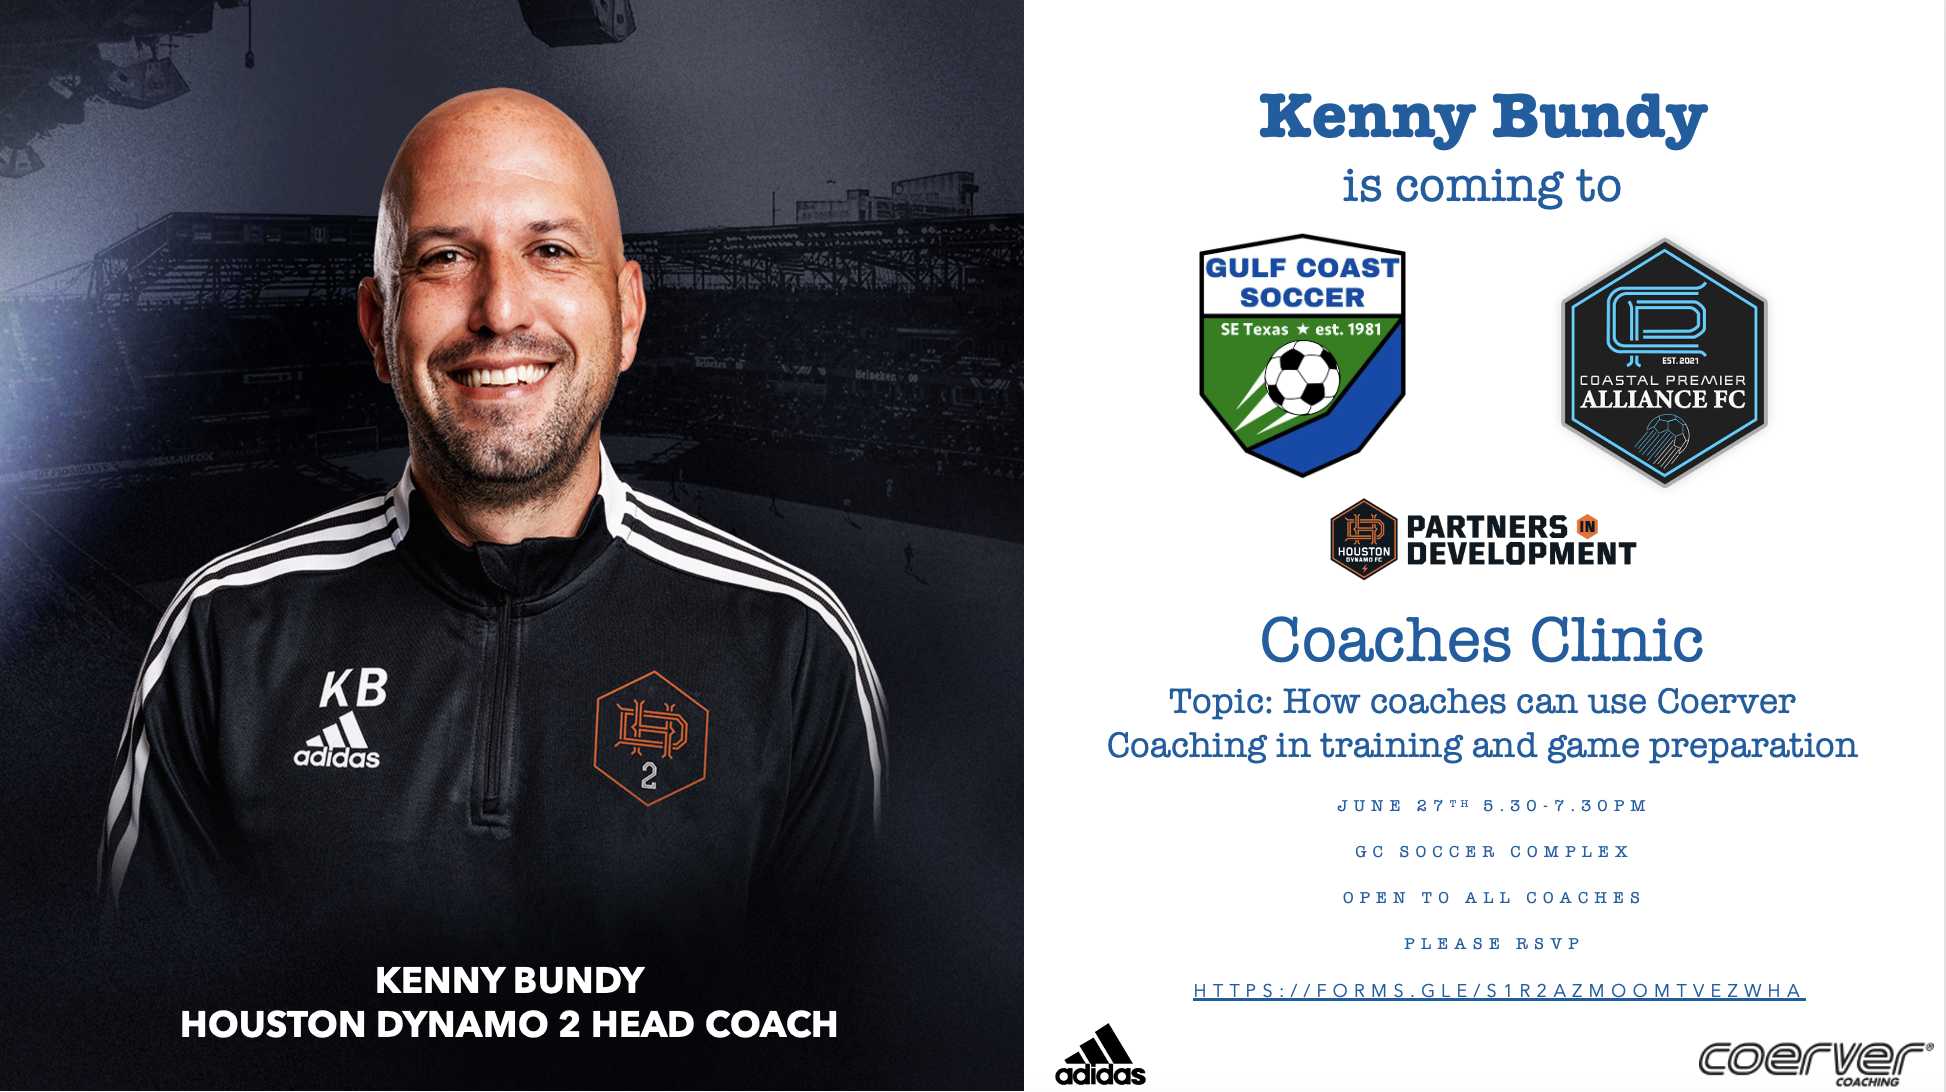 Coaches Clinic with Kenny Bundy - RSVP 